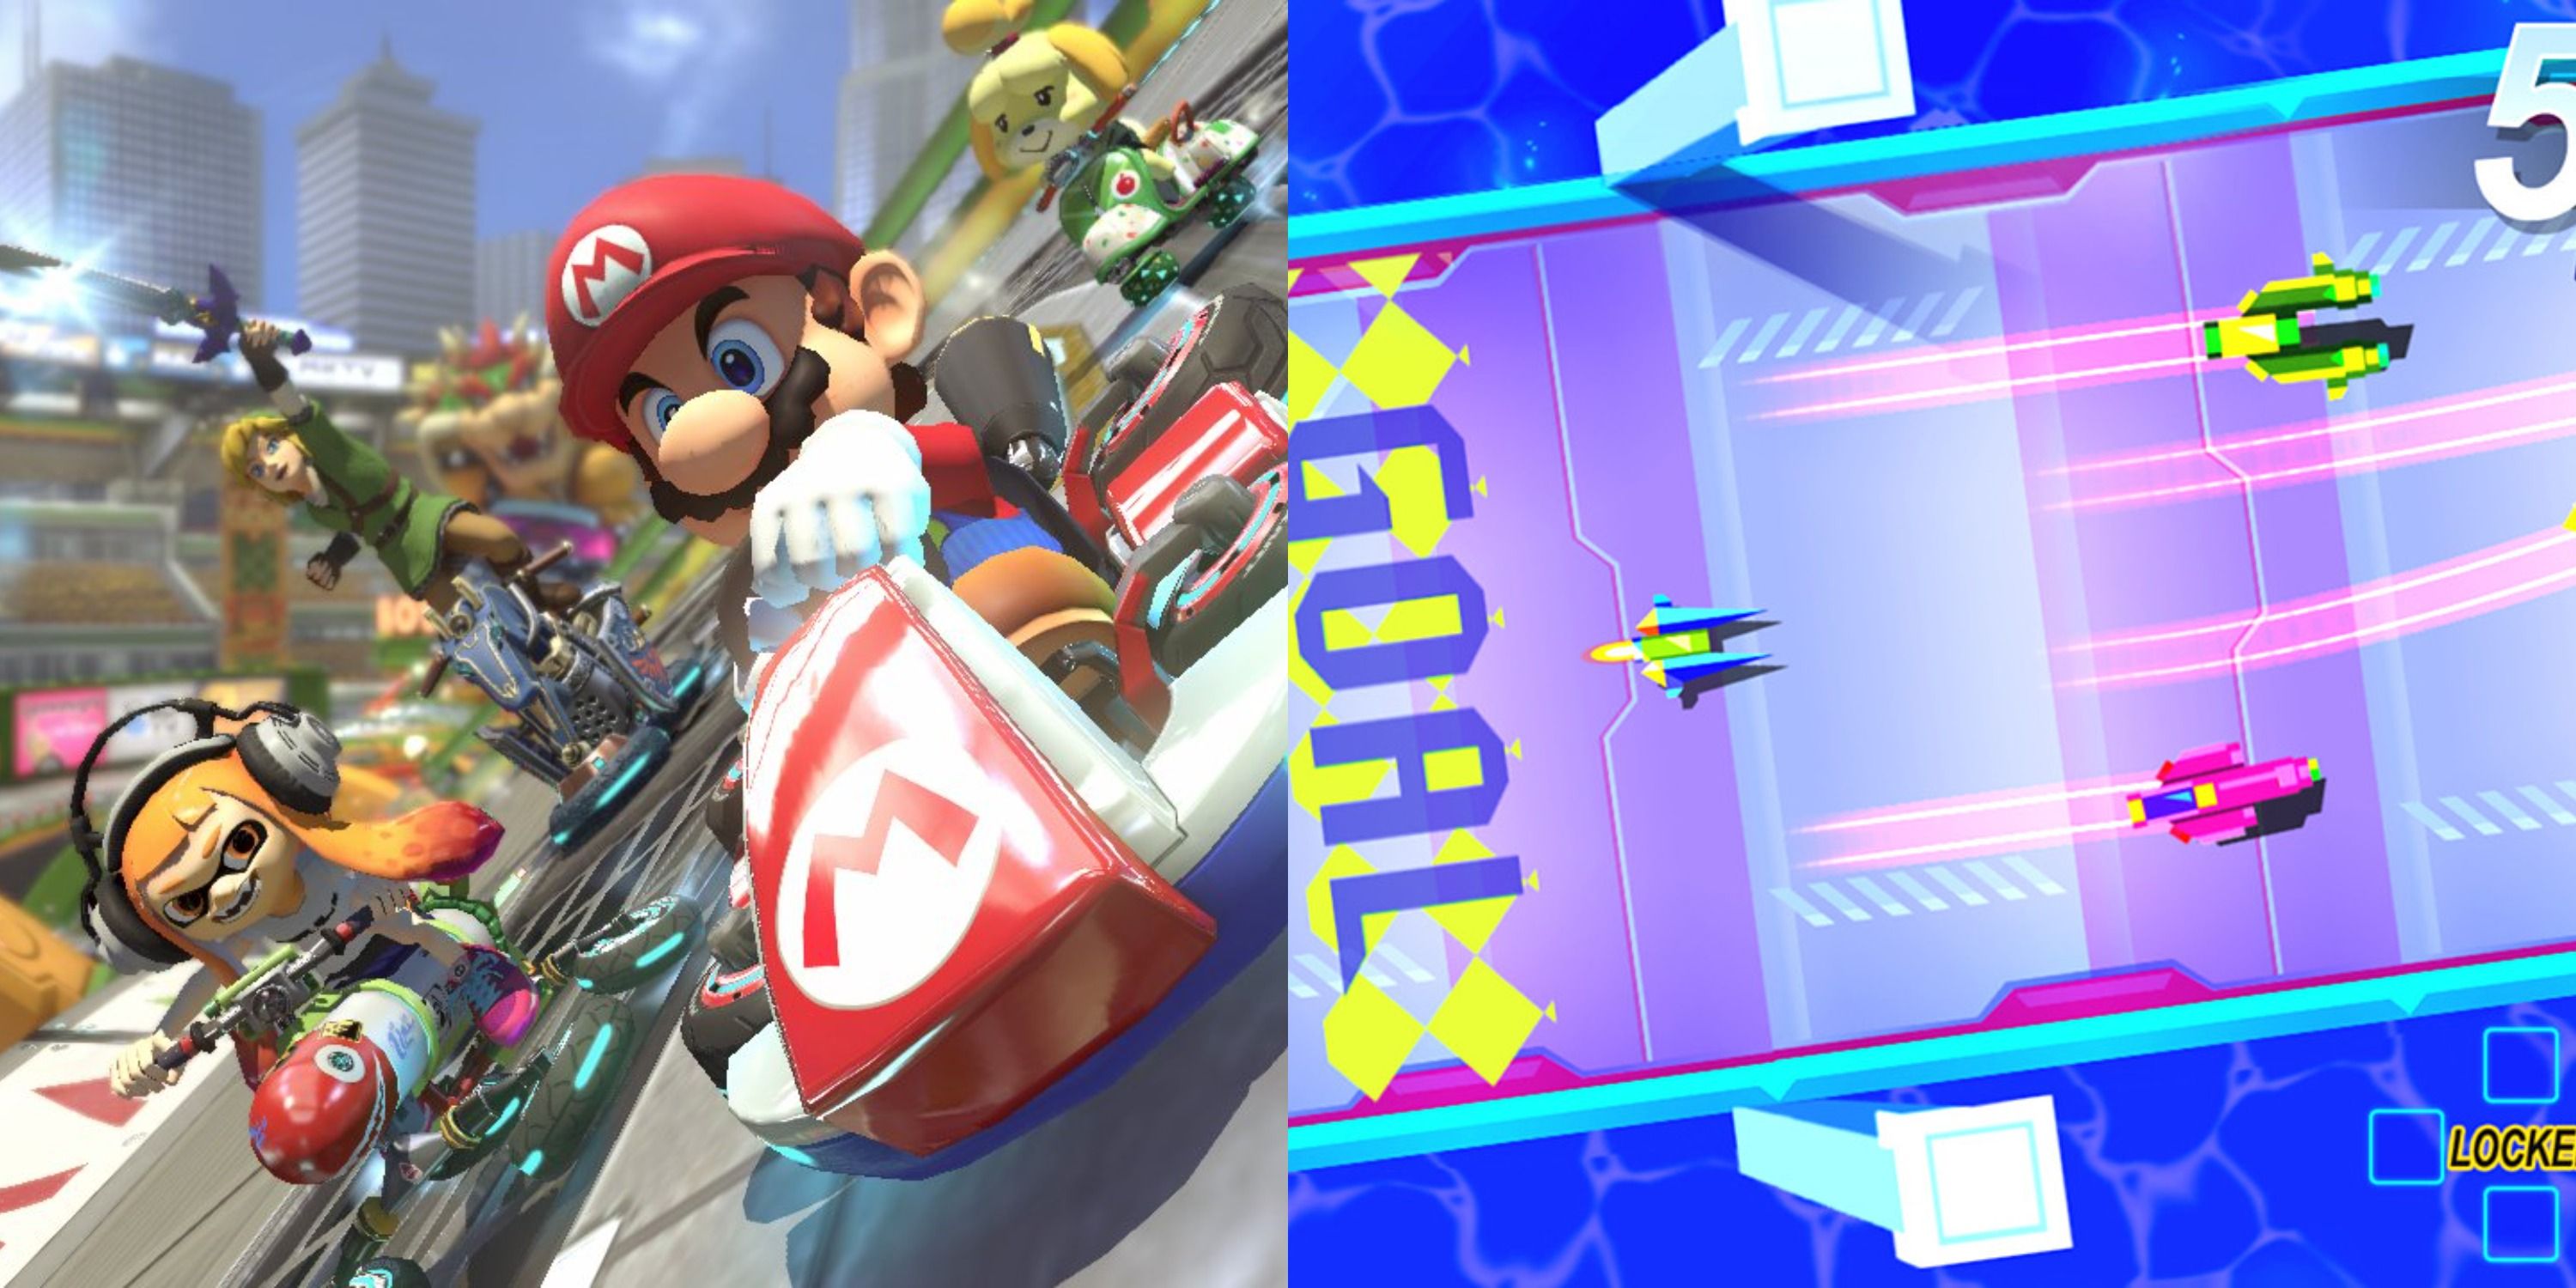 Split image of gameplay from Mario Kart 8 Deluxe and The Next Penelope